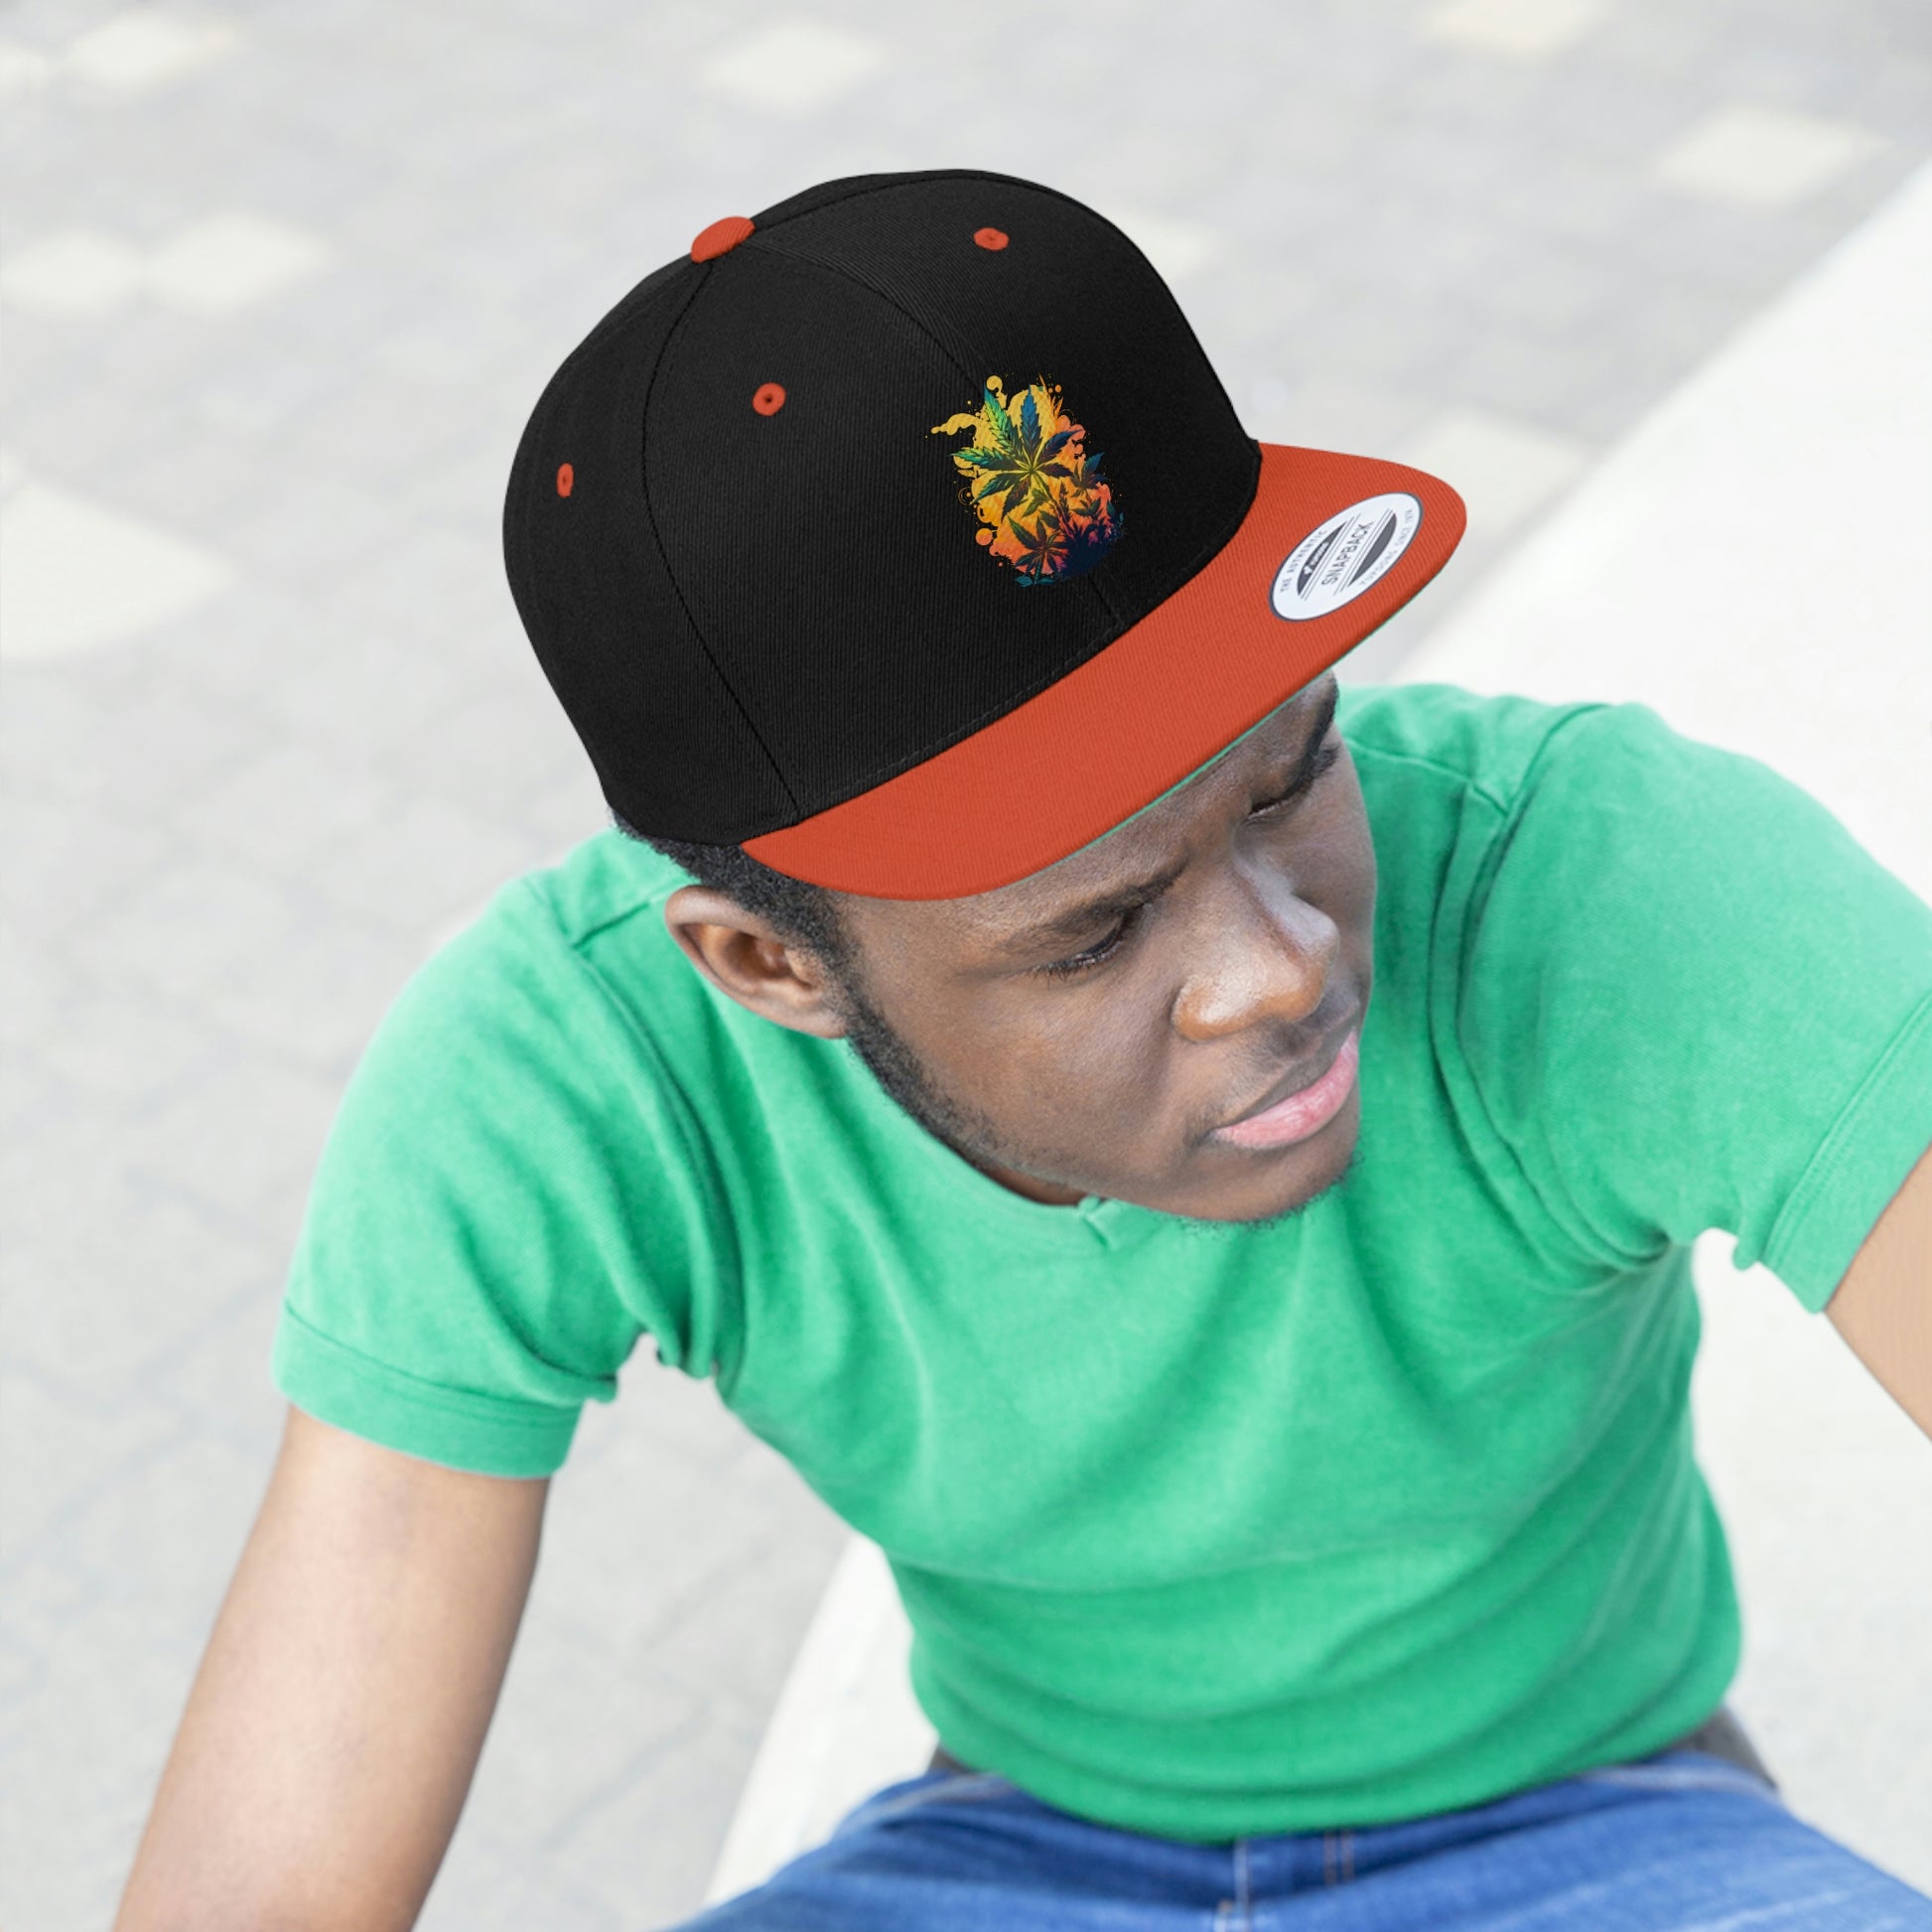 a young man gazing wearing a orange and black snapback hat with the warm cannabis paradise logo which consists of weed leaves on a yellow and orange background